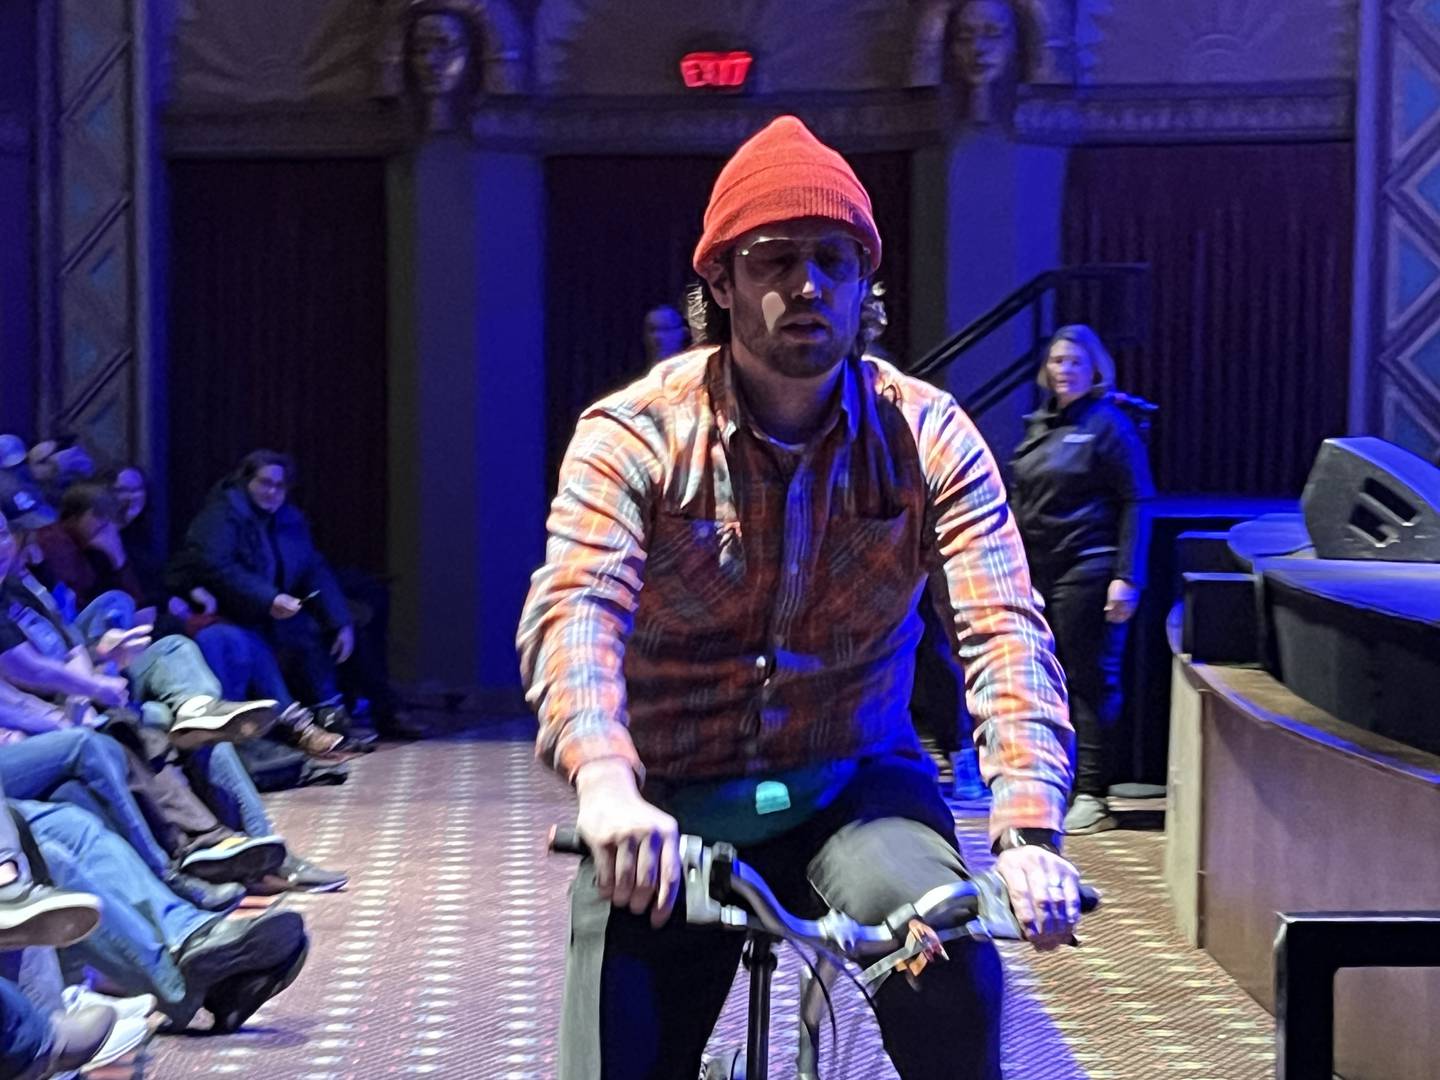 Jon Heder, who played Napoleon Dynamite in the 2004 MTV Films production of the same name, was in character when he rode a bike through the aisles of the Egyptian Theatre on Jan. 21, 2024.